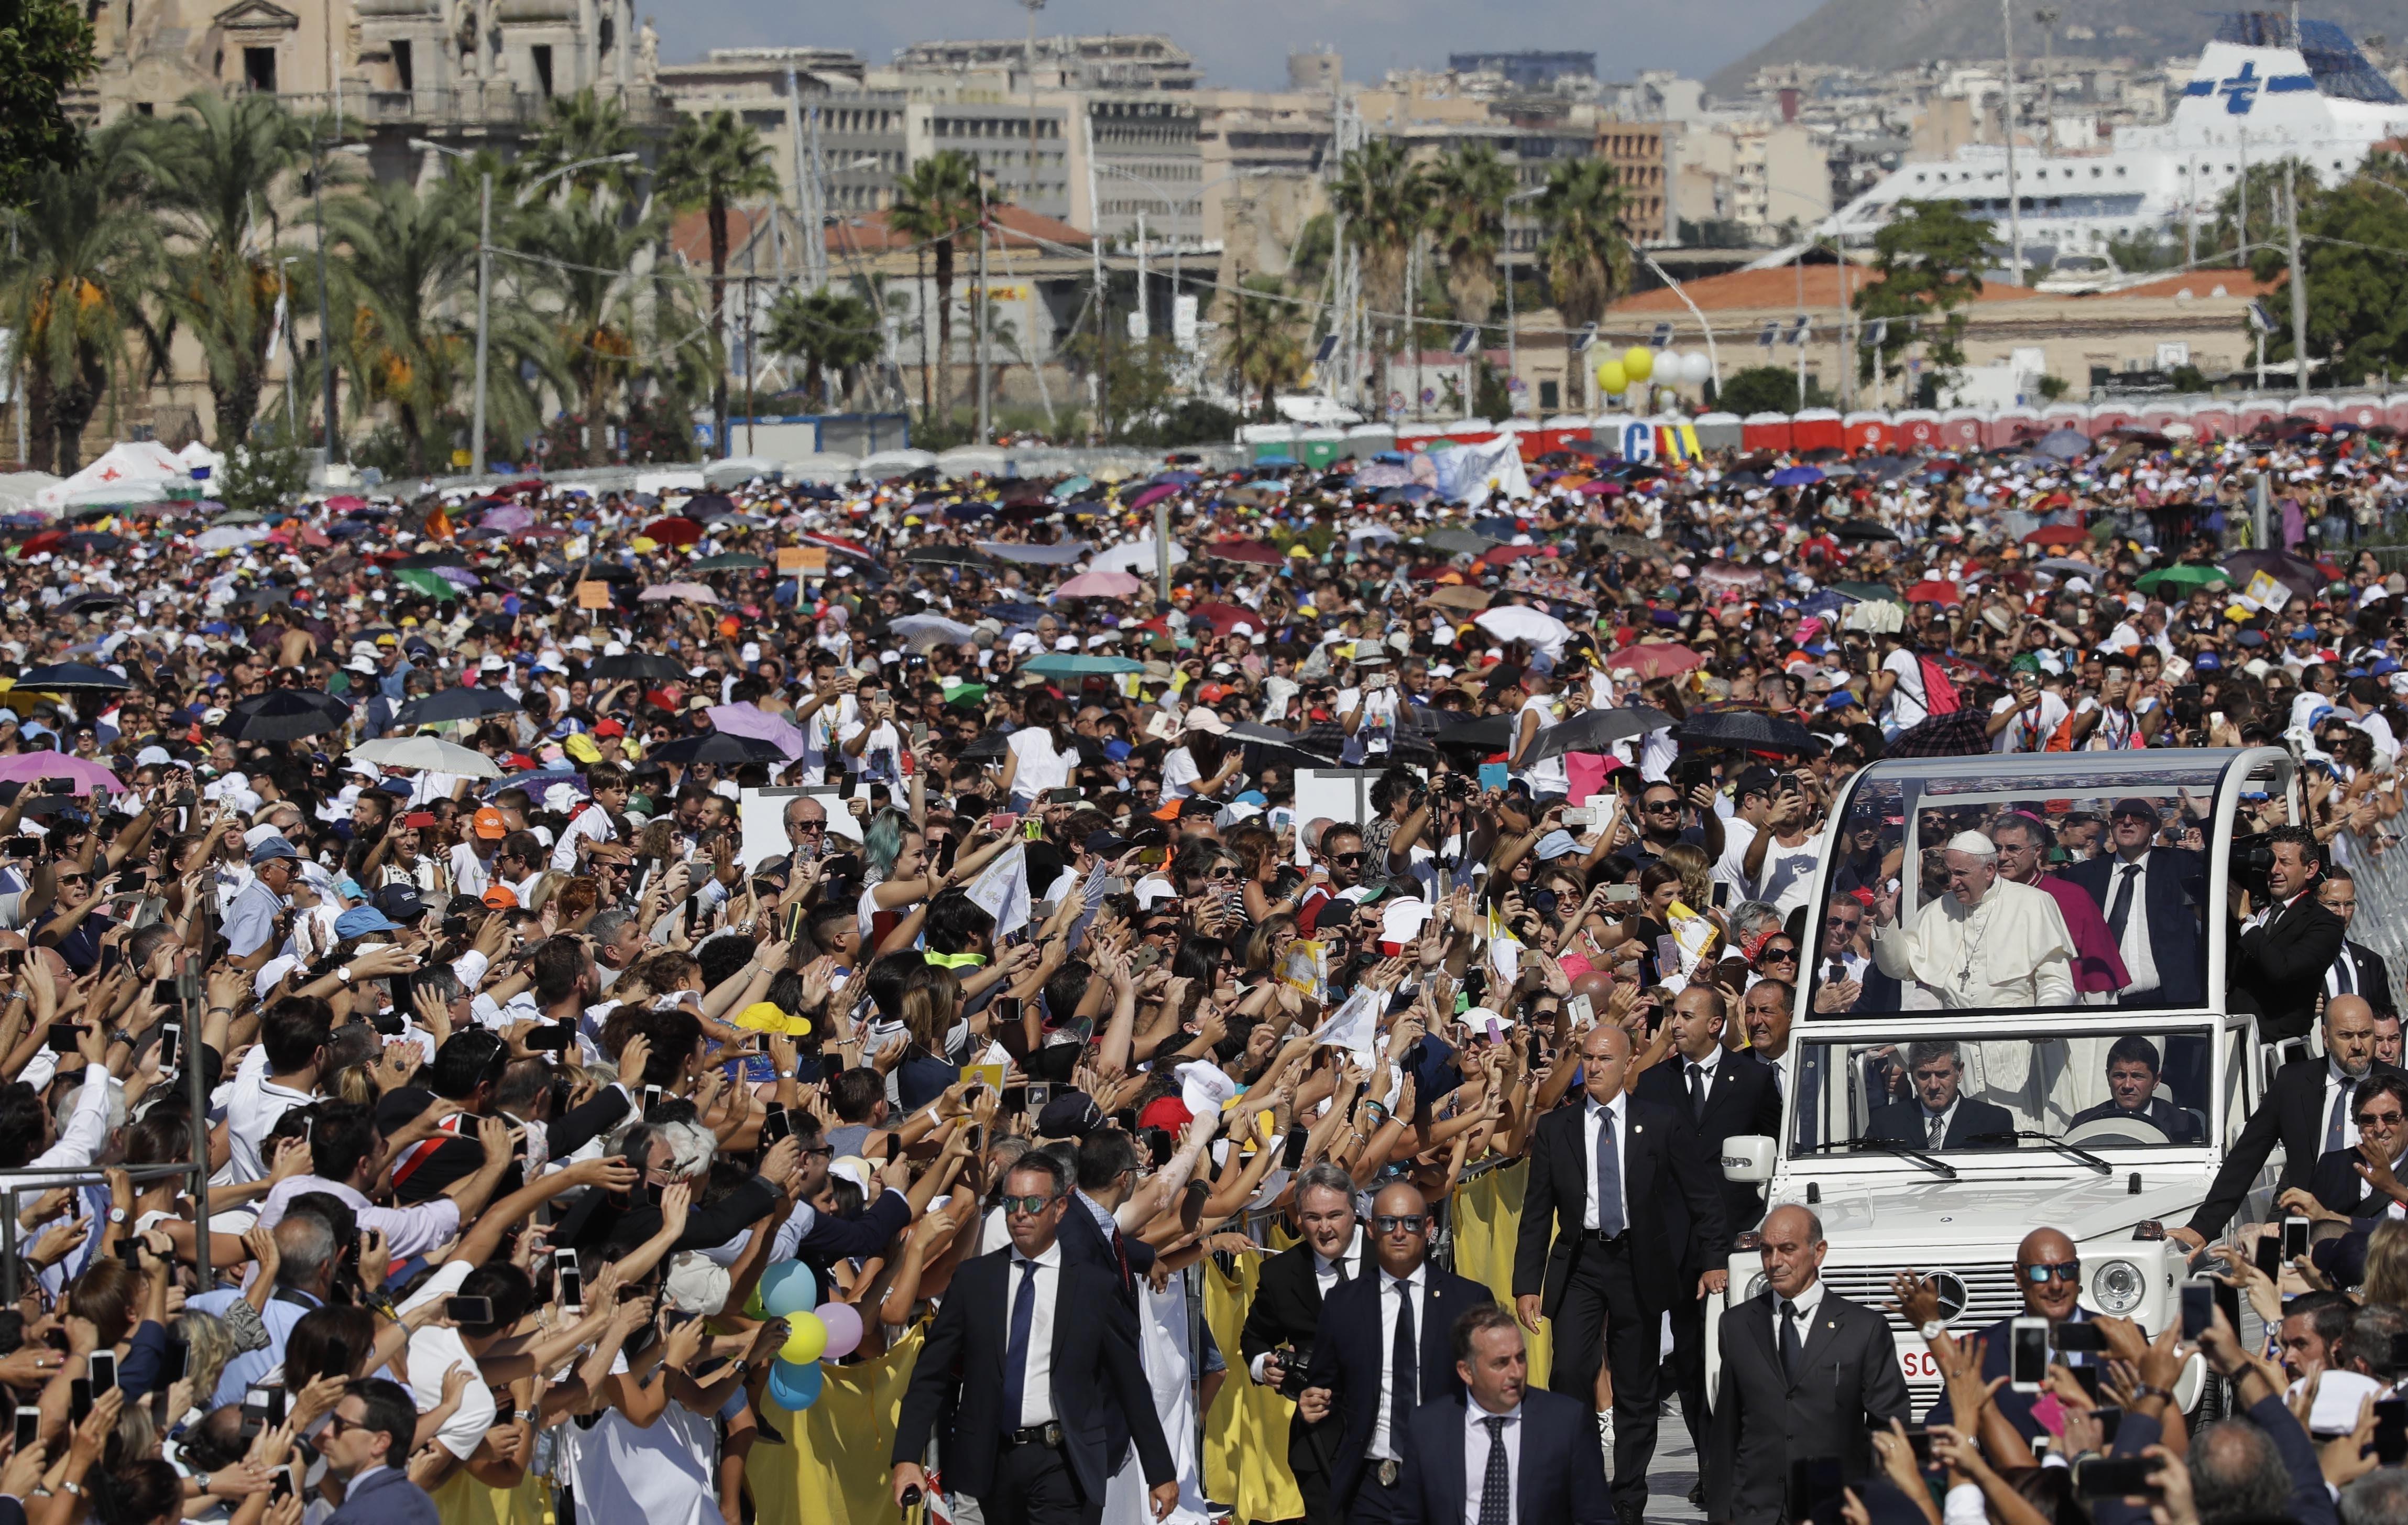 Pope Francis is driven through the crowd in Palermo, Italy, Saturday, Sept. 15, 2018. Pope Francis is paying tribute in Sicily to a priest who worked to keep youths away from the Mafia and was slain by mobsters. Francis has flown to the Mediterranean island on the 25th anniversary of the assassination in Palermo of the Rev. Giuseppe "Pino" Puglisi, who has been declared a martyr by the Vatican. (AP Photo/Alessandra Tarantino) ORG XMIT: FP106